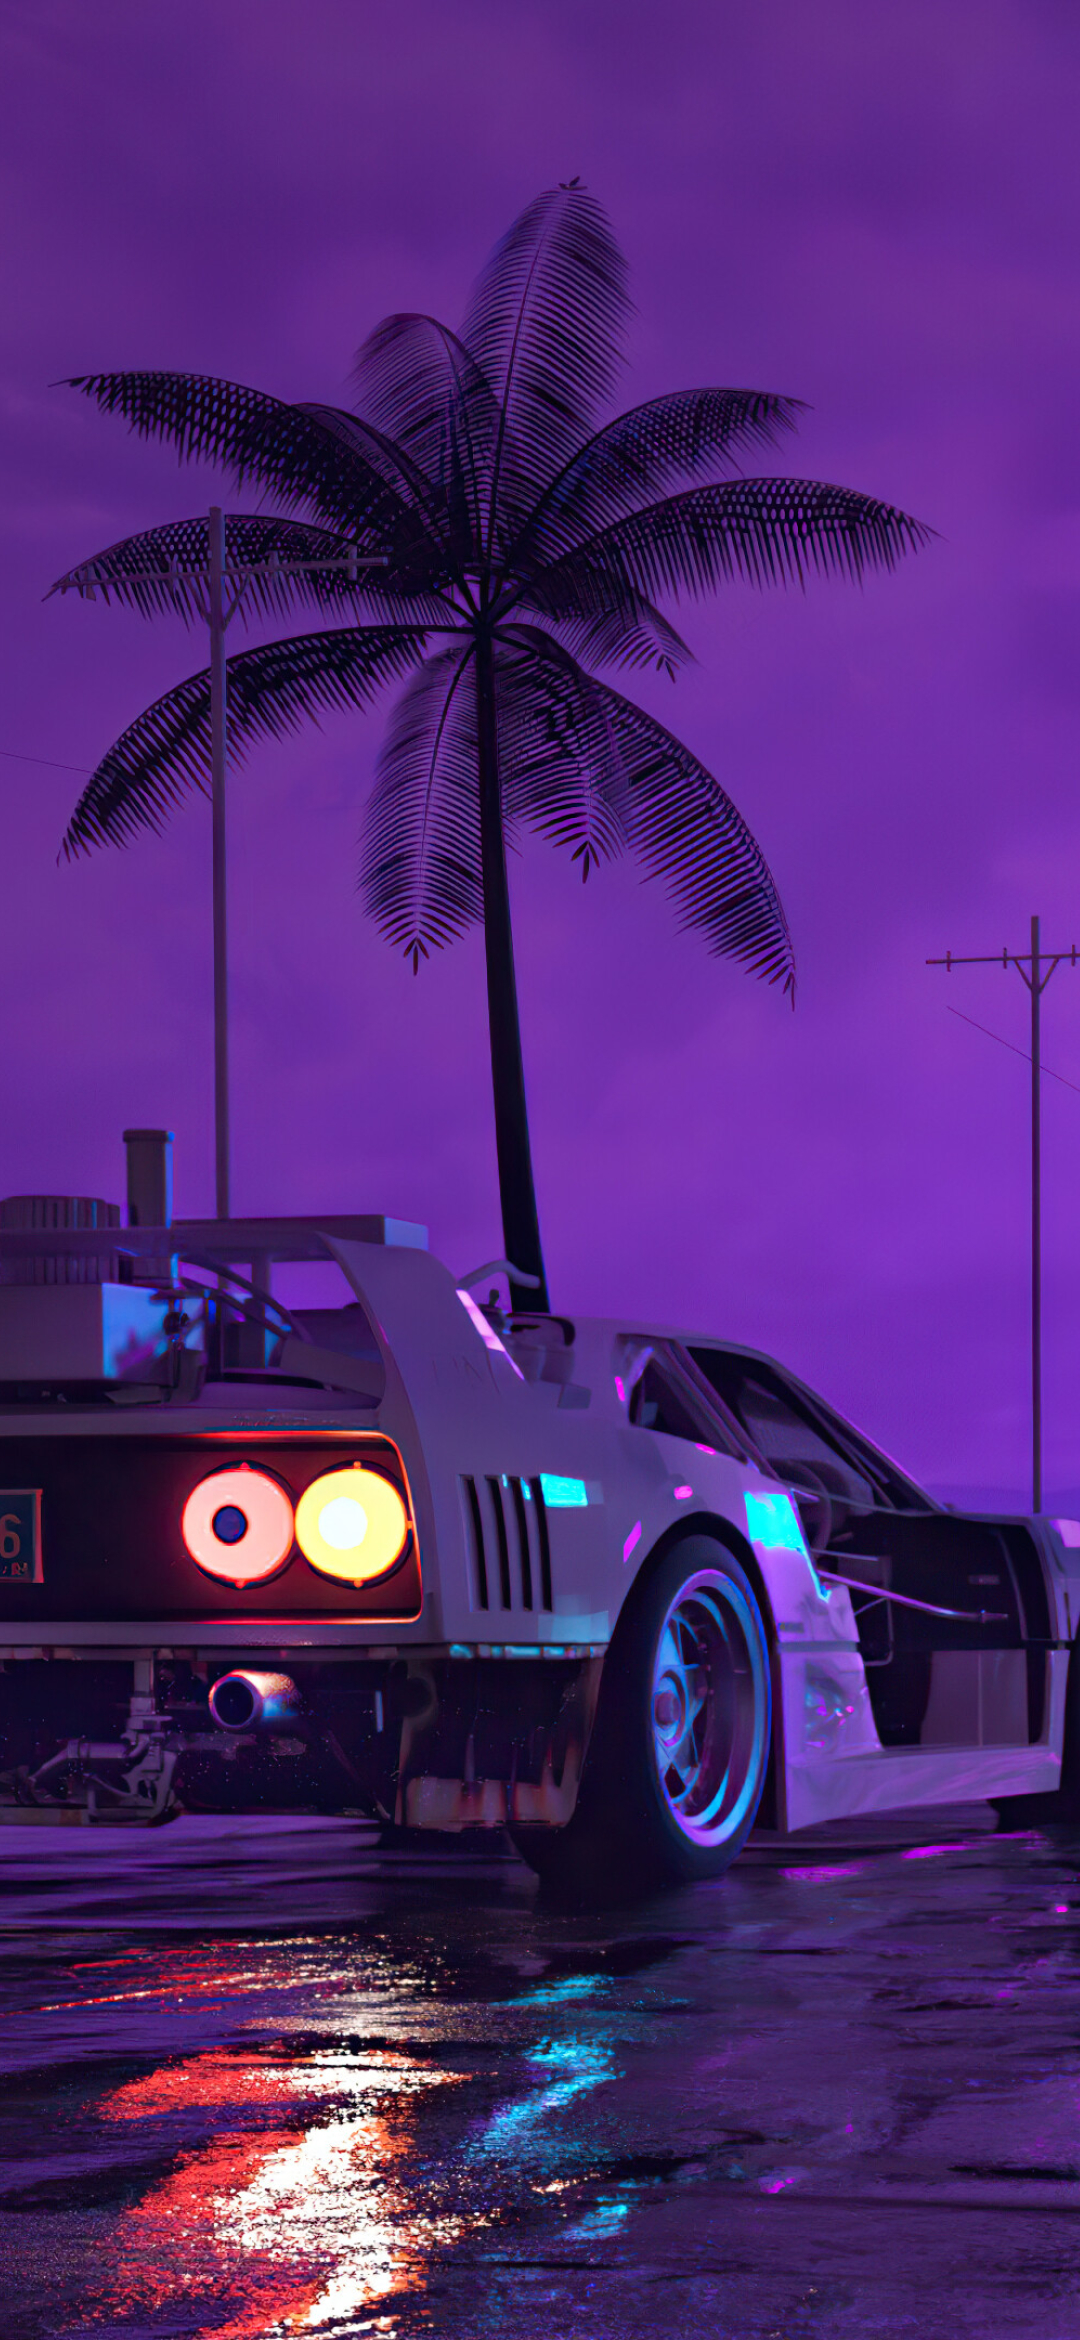 1080x2340 Retro Wave Sunset and Running Car 1080x2340 ...